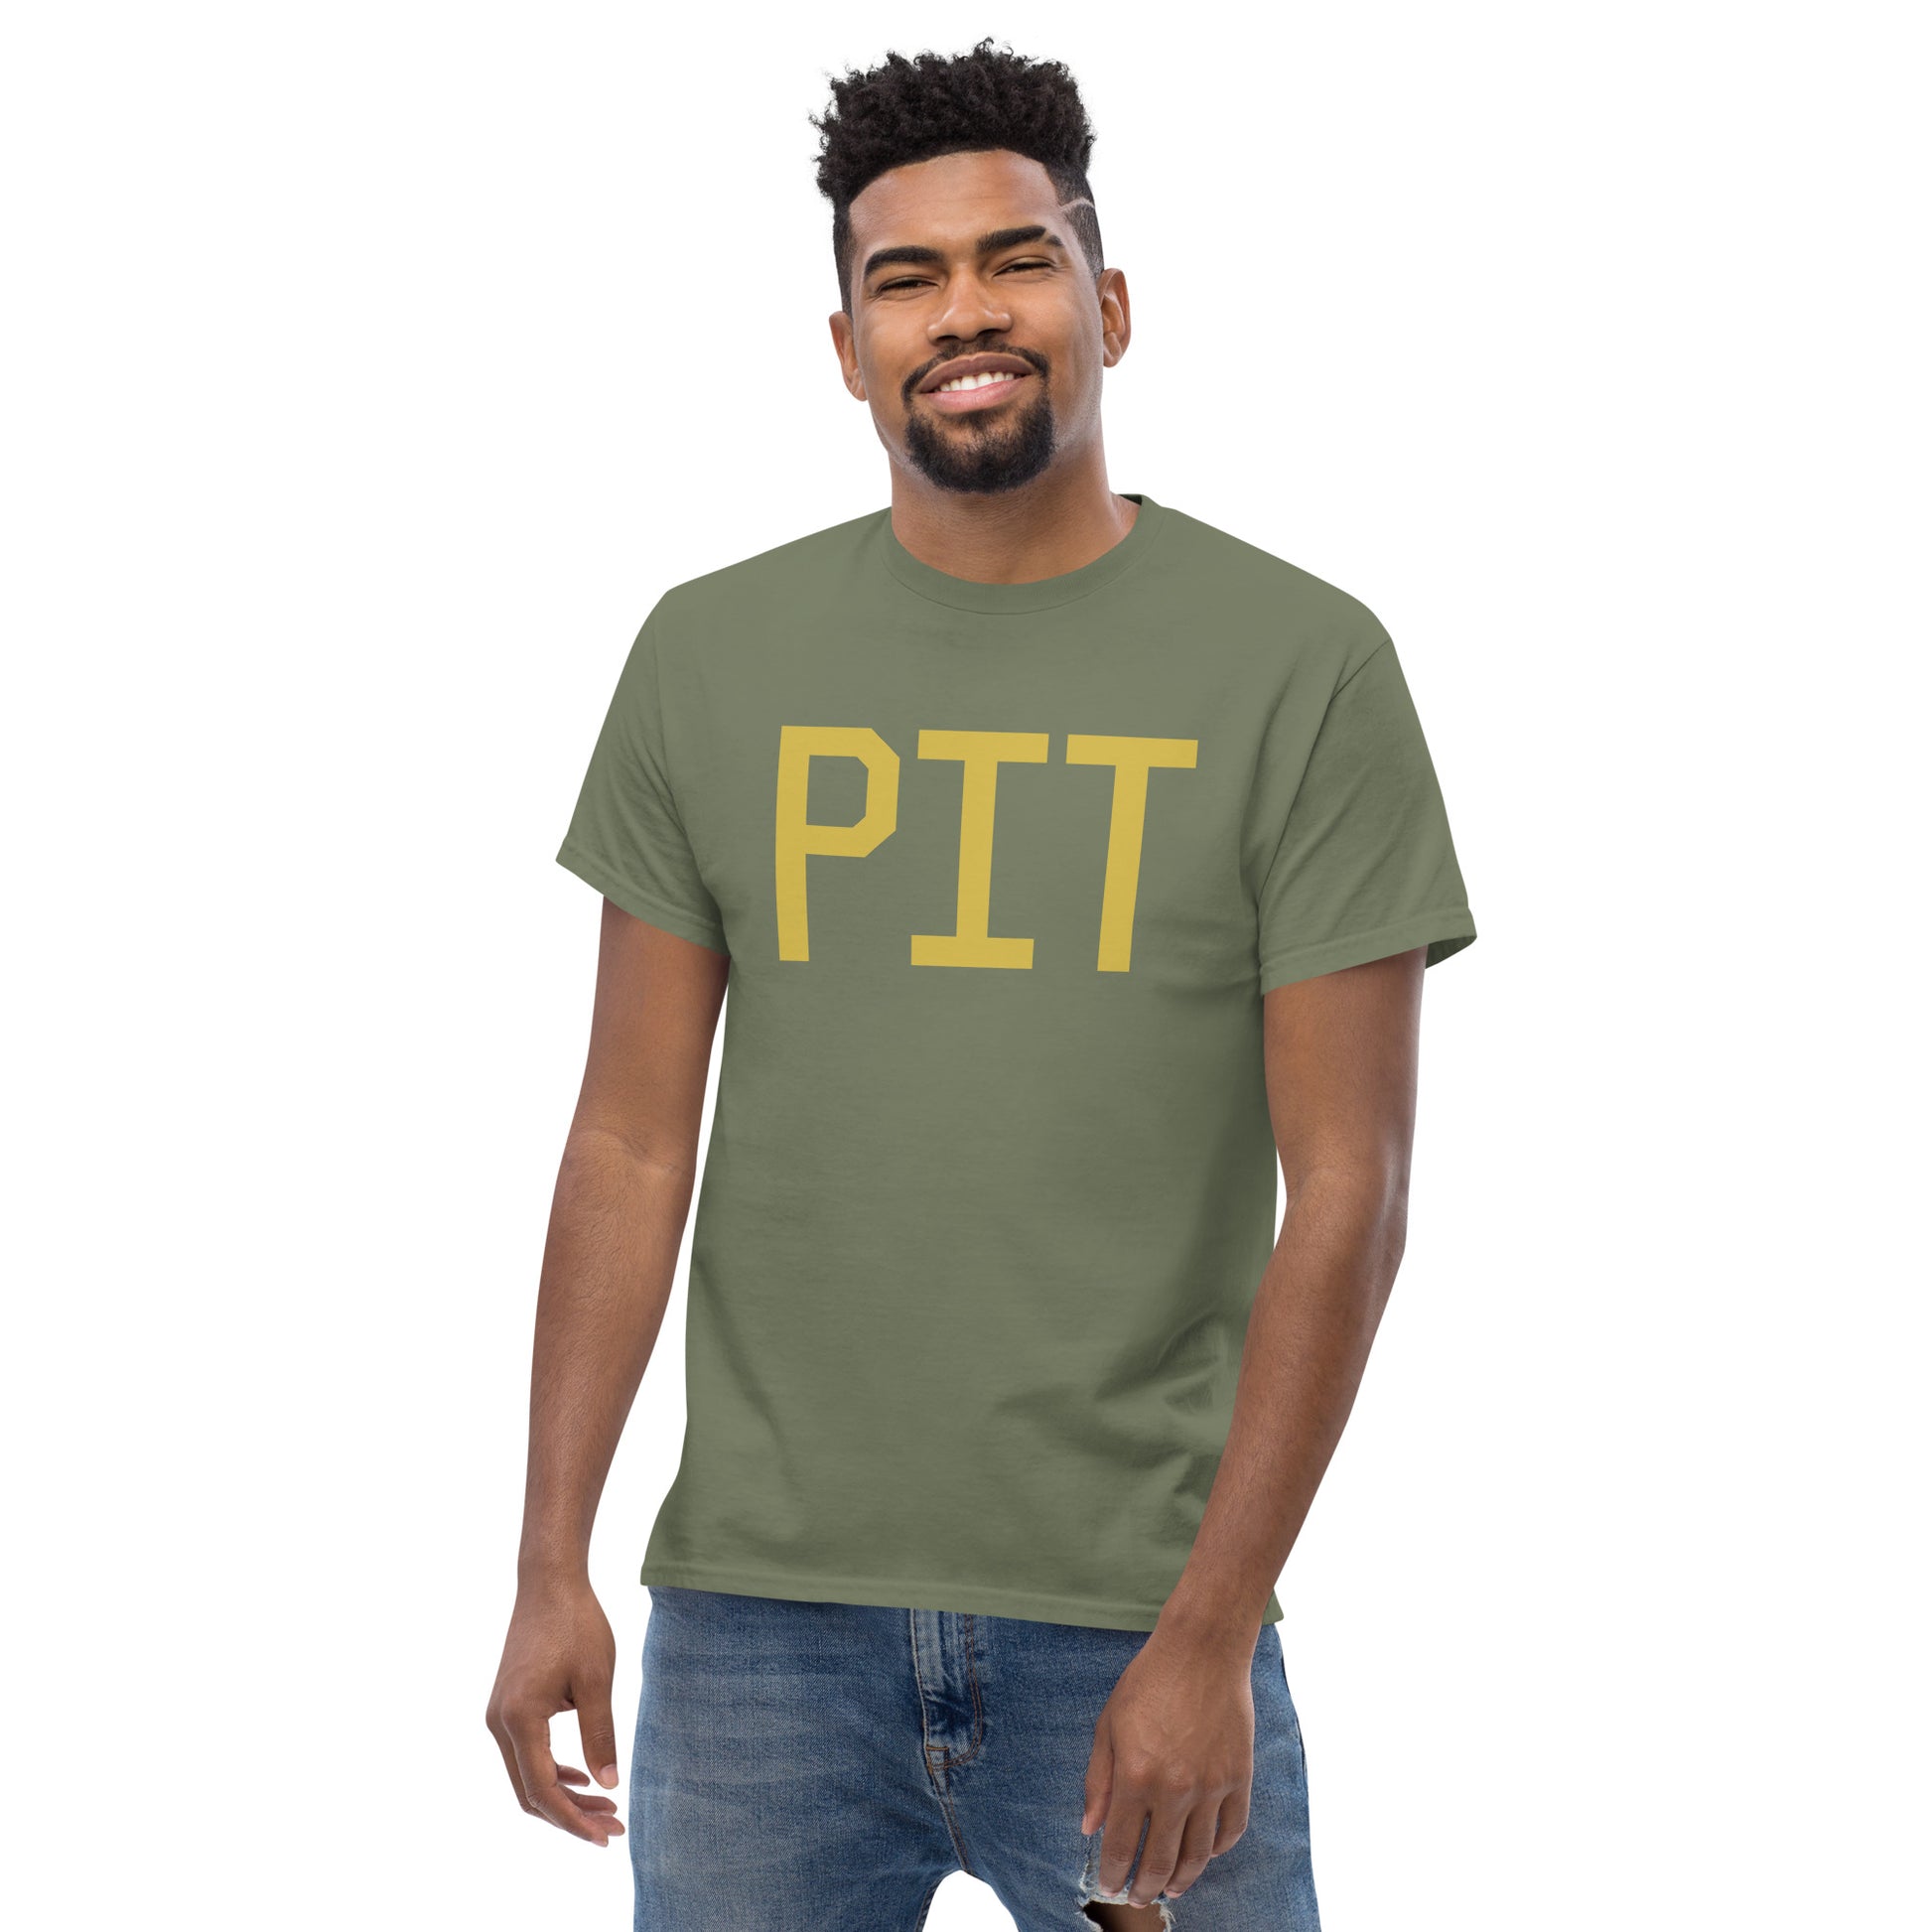 Aviation Enthusiast Men's Tee - Old Gold Graphic • PIT Pittsburgh • YHM Designs - Image 06